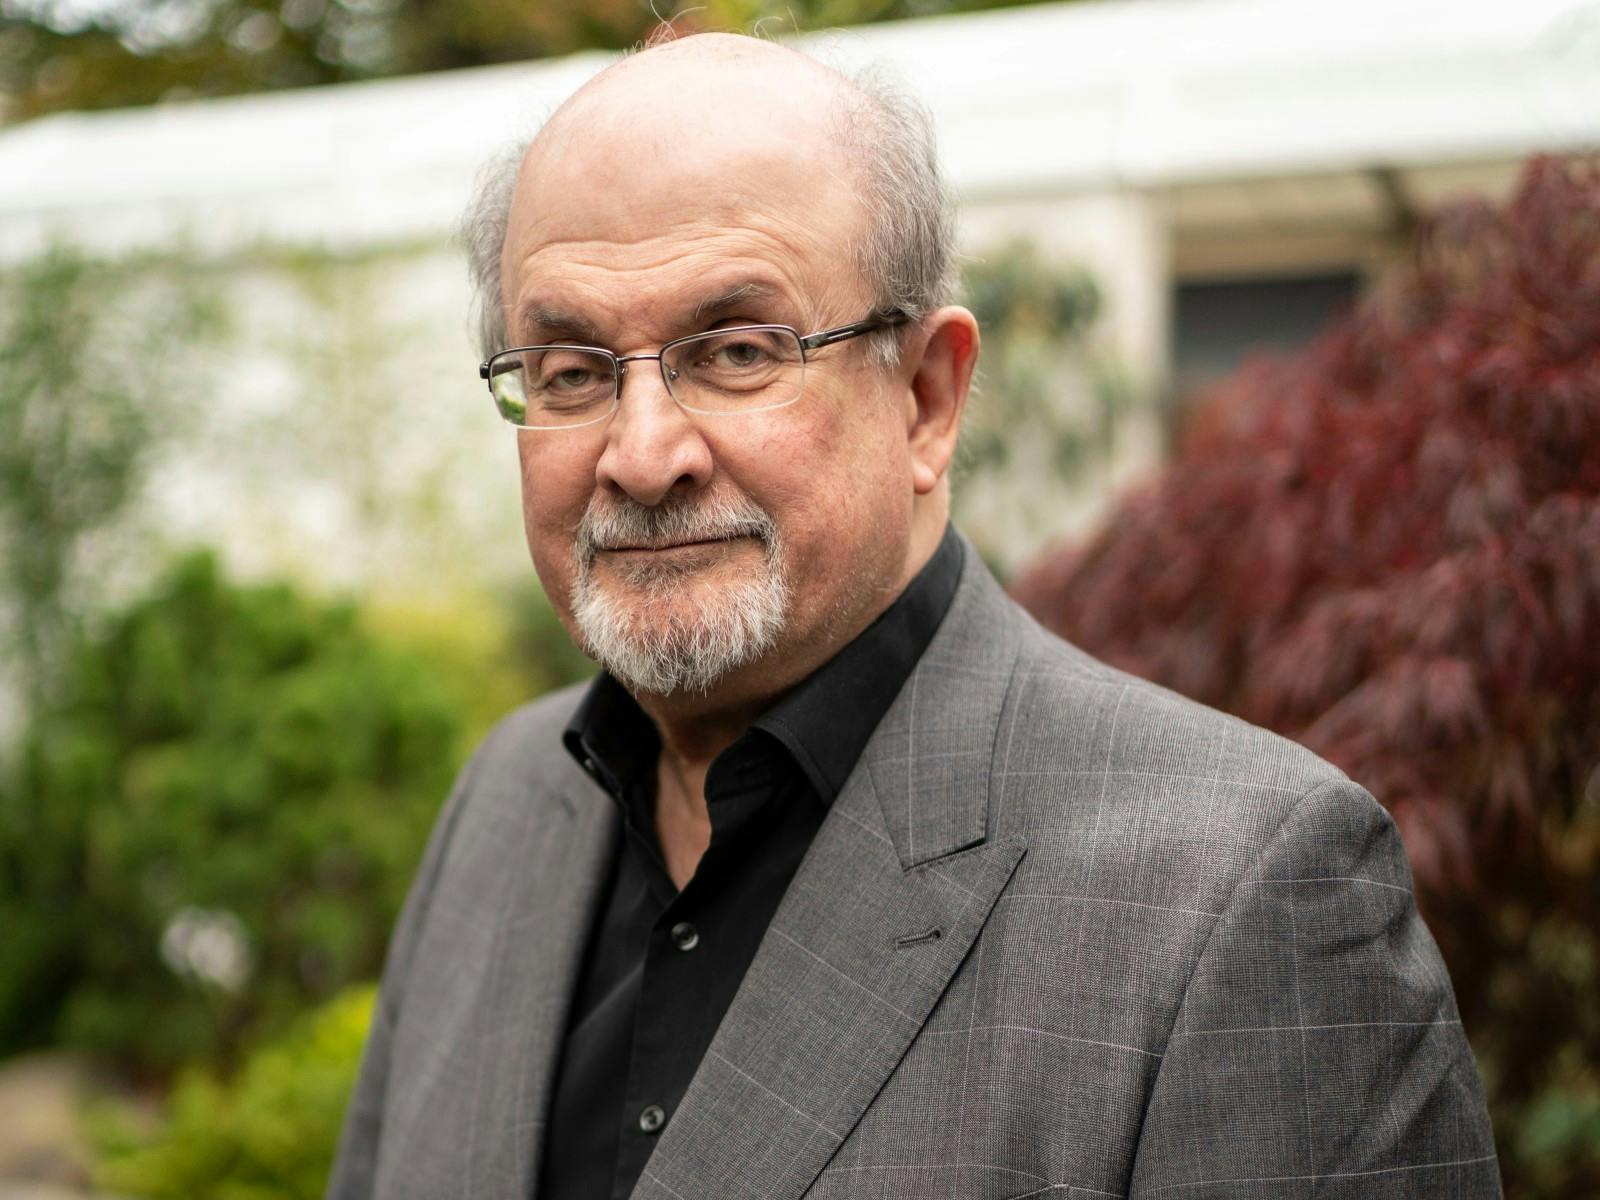 Salman Rushdie, 2019 Booker Prize shortlisted author, at the Cheltenham Literature Festival 2019 on October 12, 2019 (David Levenson/Getty Images)
